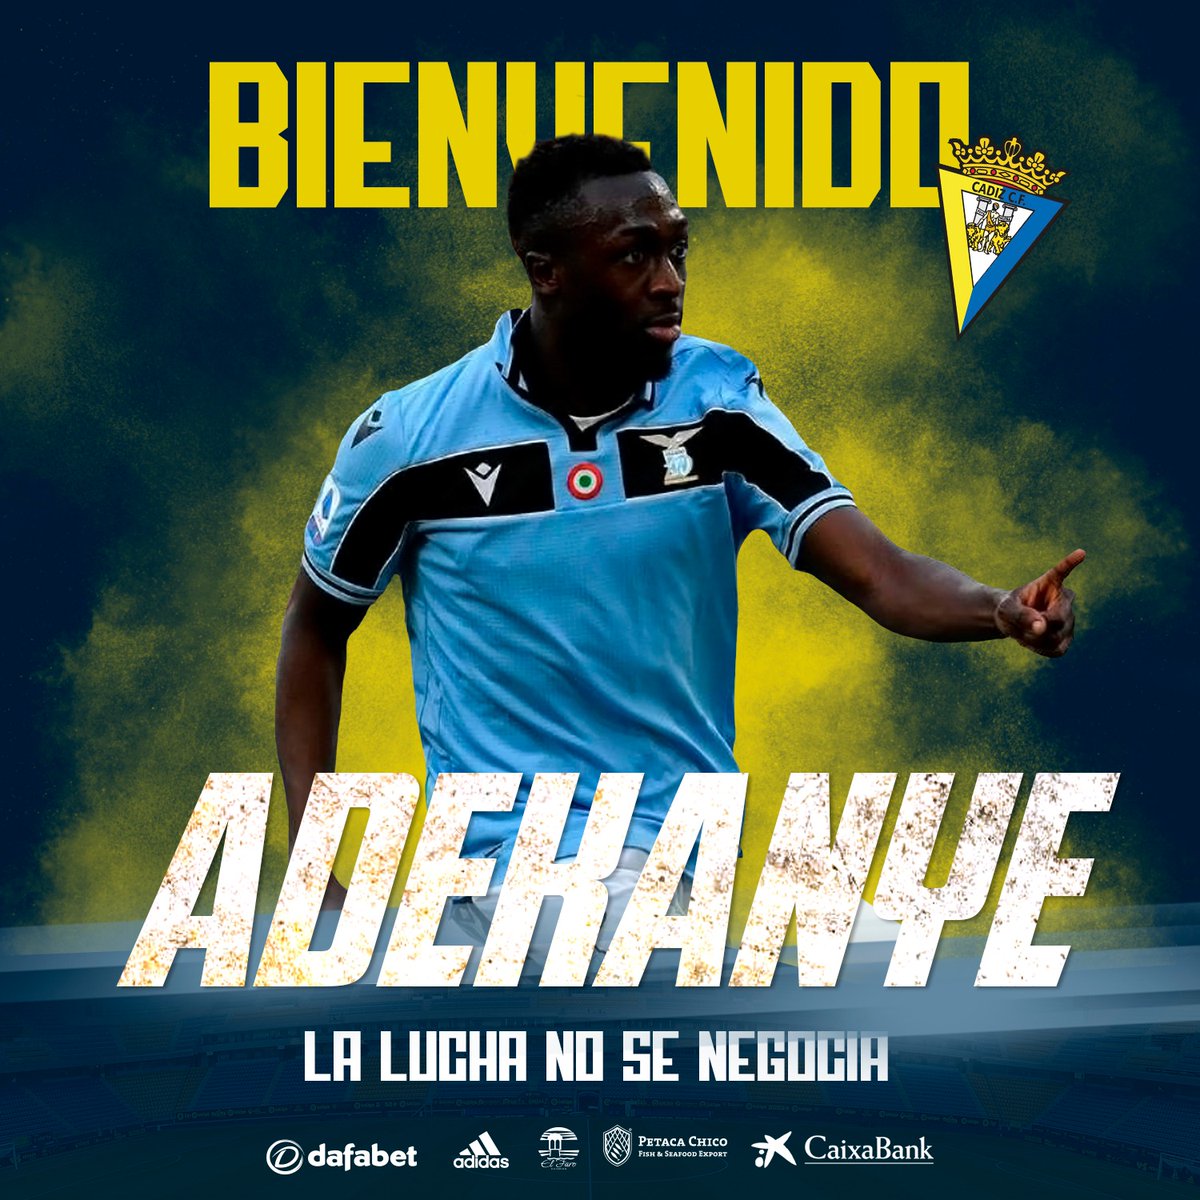  DONE DEAL  - October 5BOBBY ADEKANYE(Lazio to Cádiz )Age: 21Country: Netherlands  Position: WingerFee: LoanContract: Until 2021  #LLL